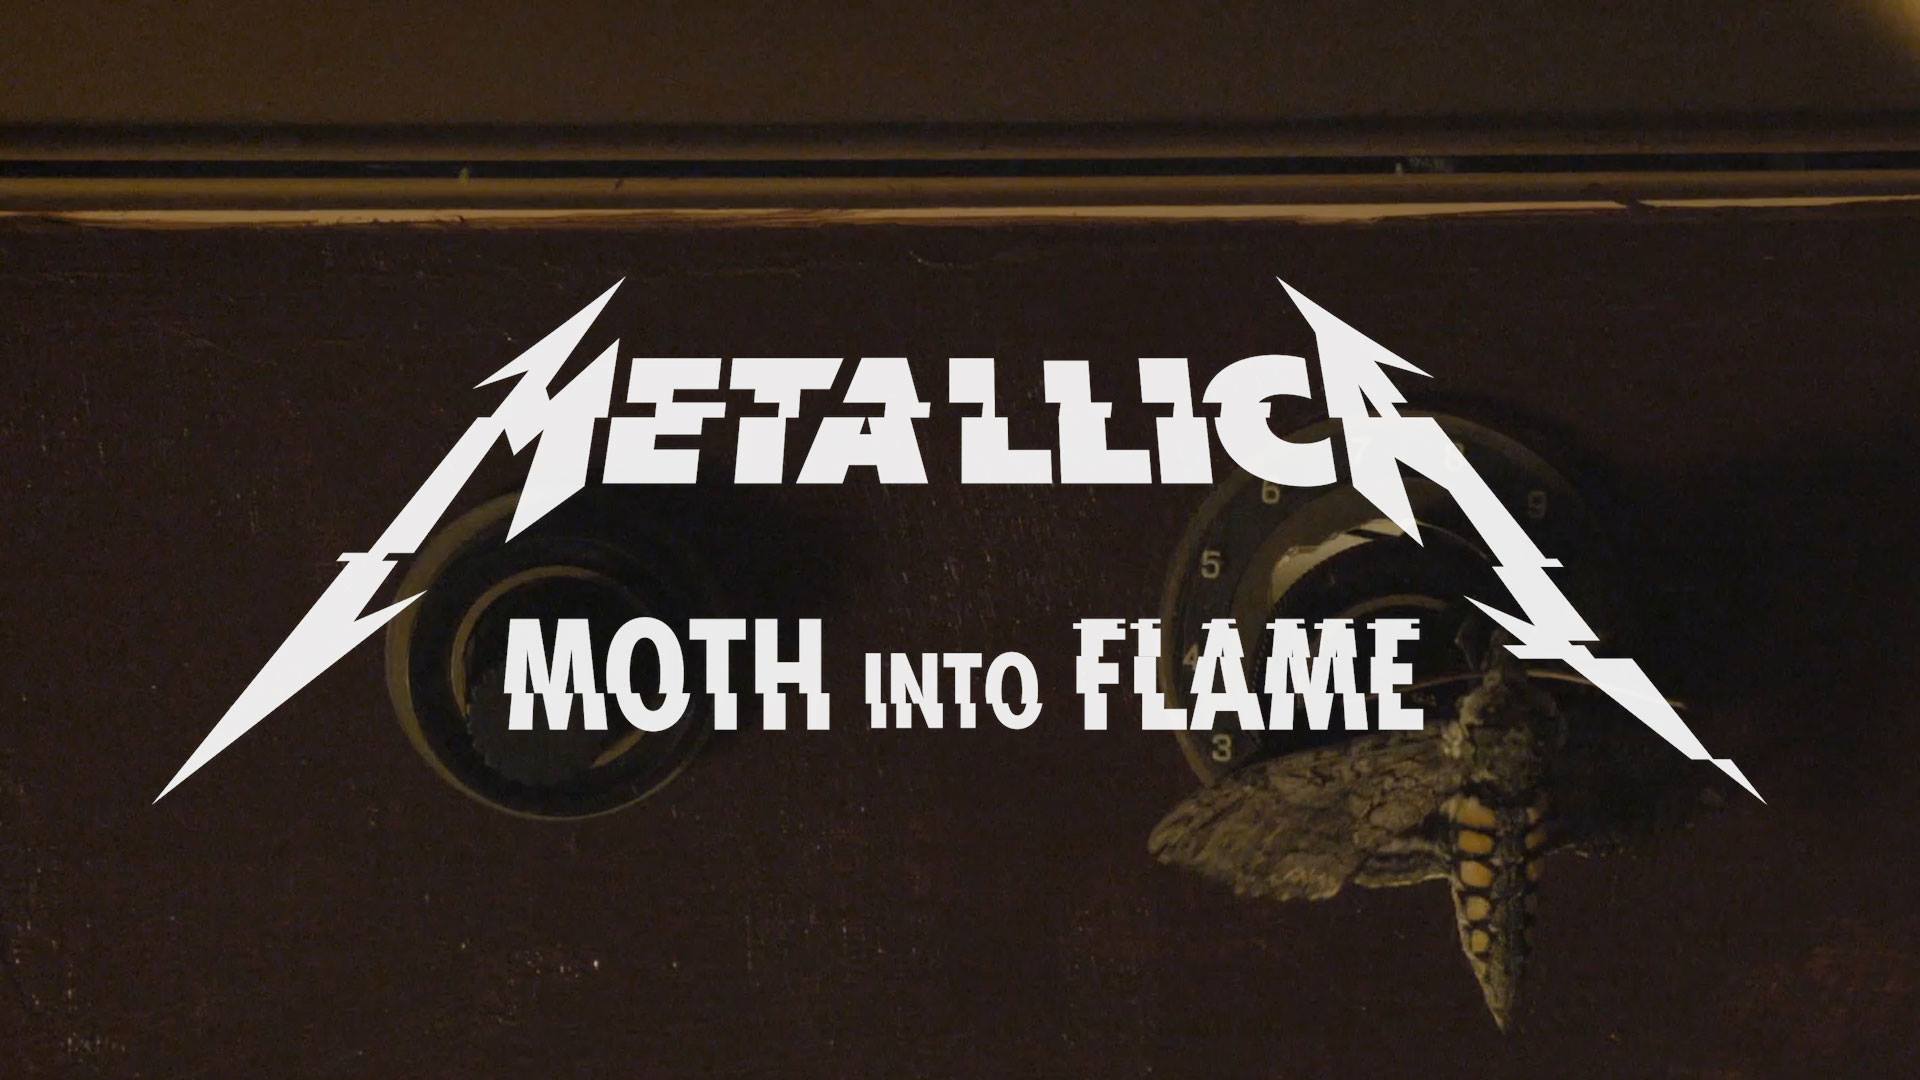 METALLICA PREMIERE NEW TRACK “MOTH INTO FLAME” FROM UPCOMING STUDIO ALBUM